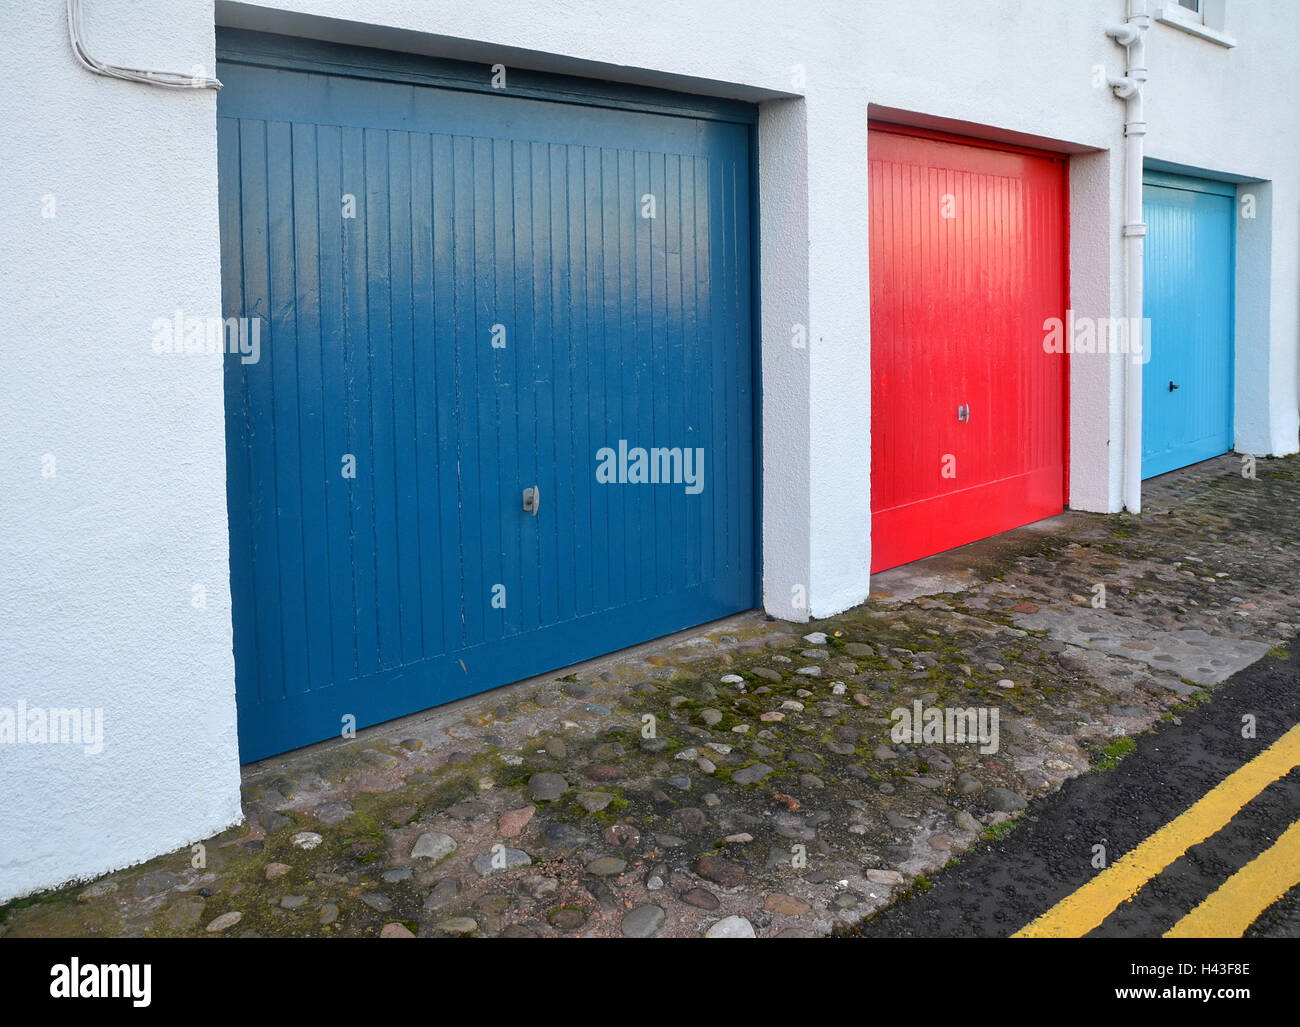 A row of red, blue, and pale blue garage doors run parallel with double yellow lines painted on the roads edge. Stock Photo